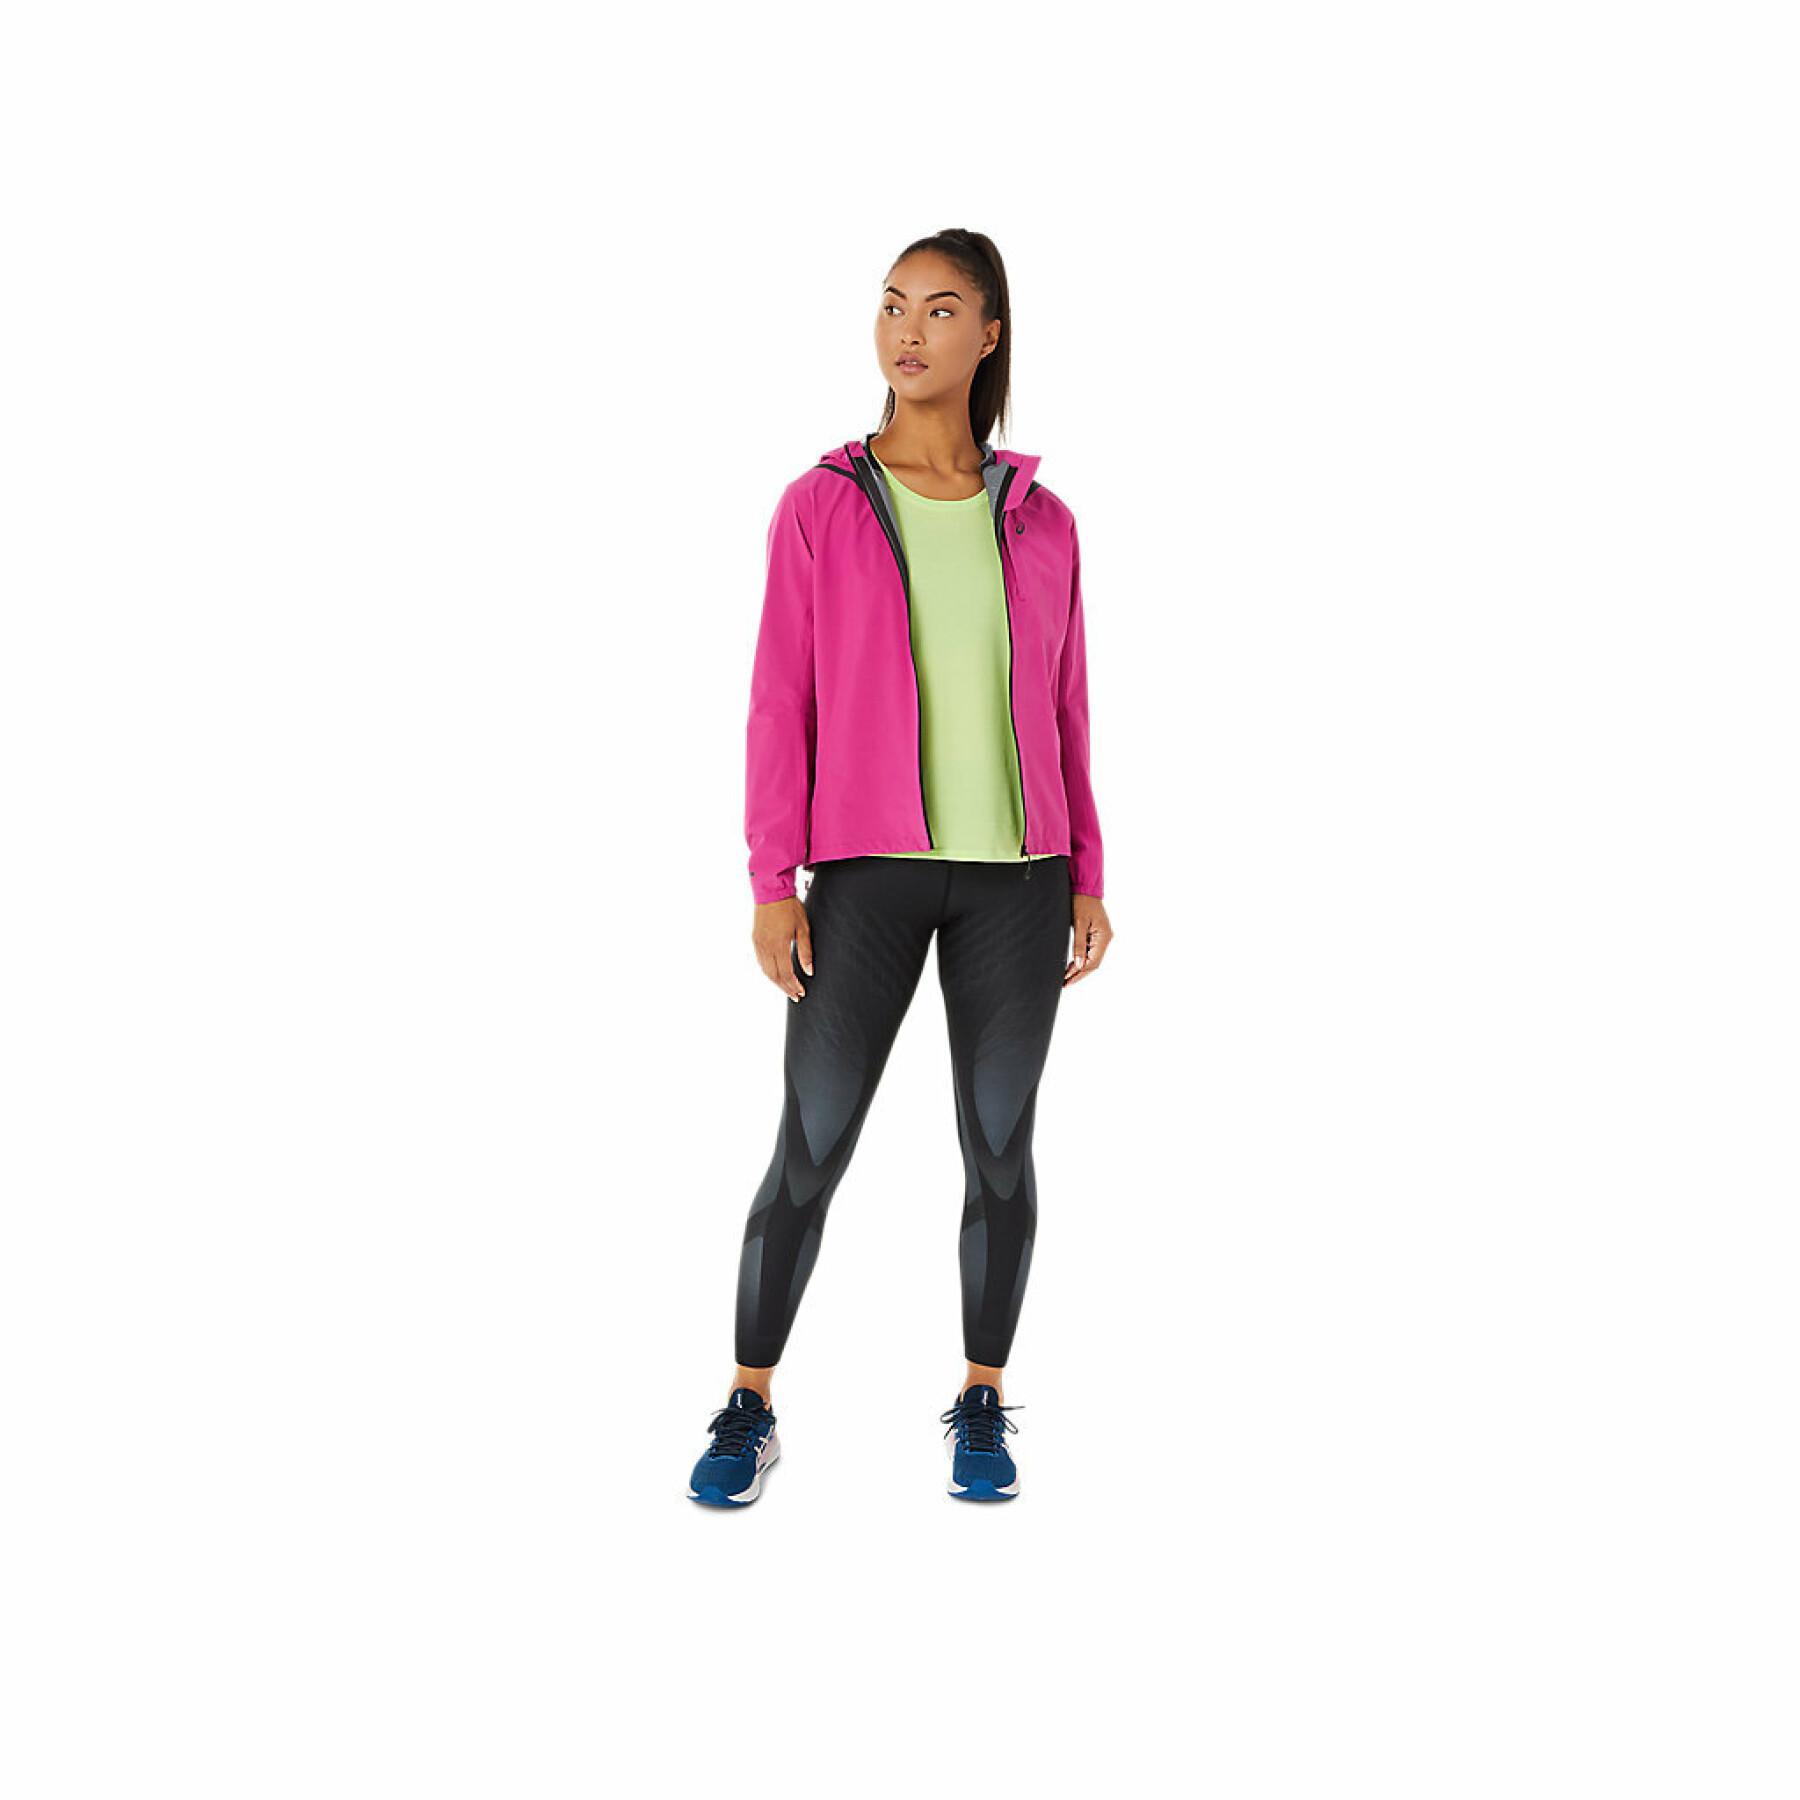 Chaqueta impermeable para mujer Asics Accelerate 2.0